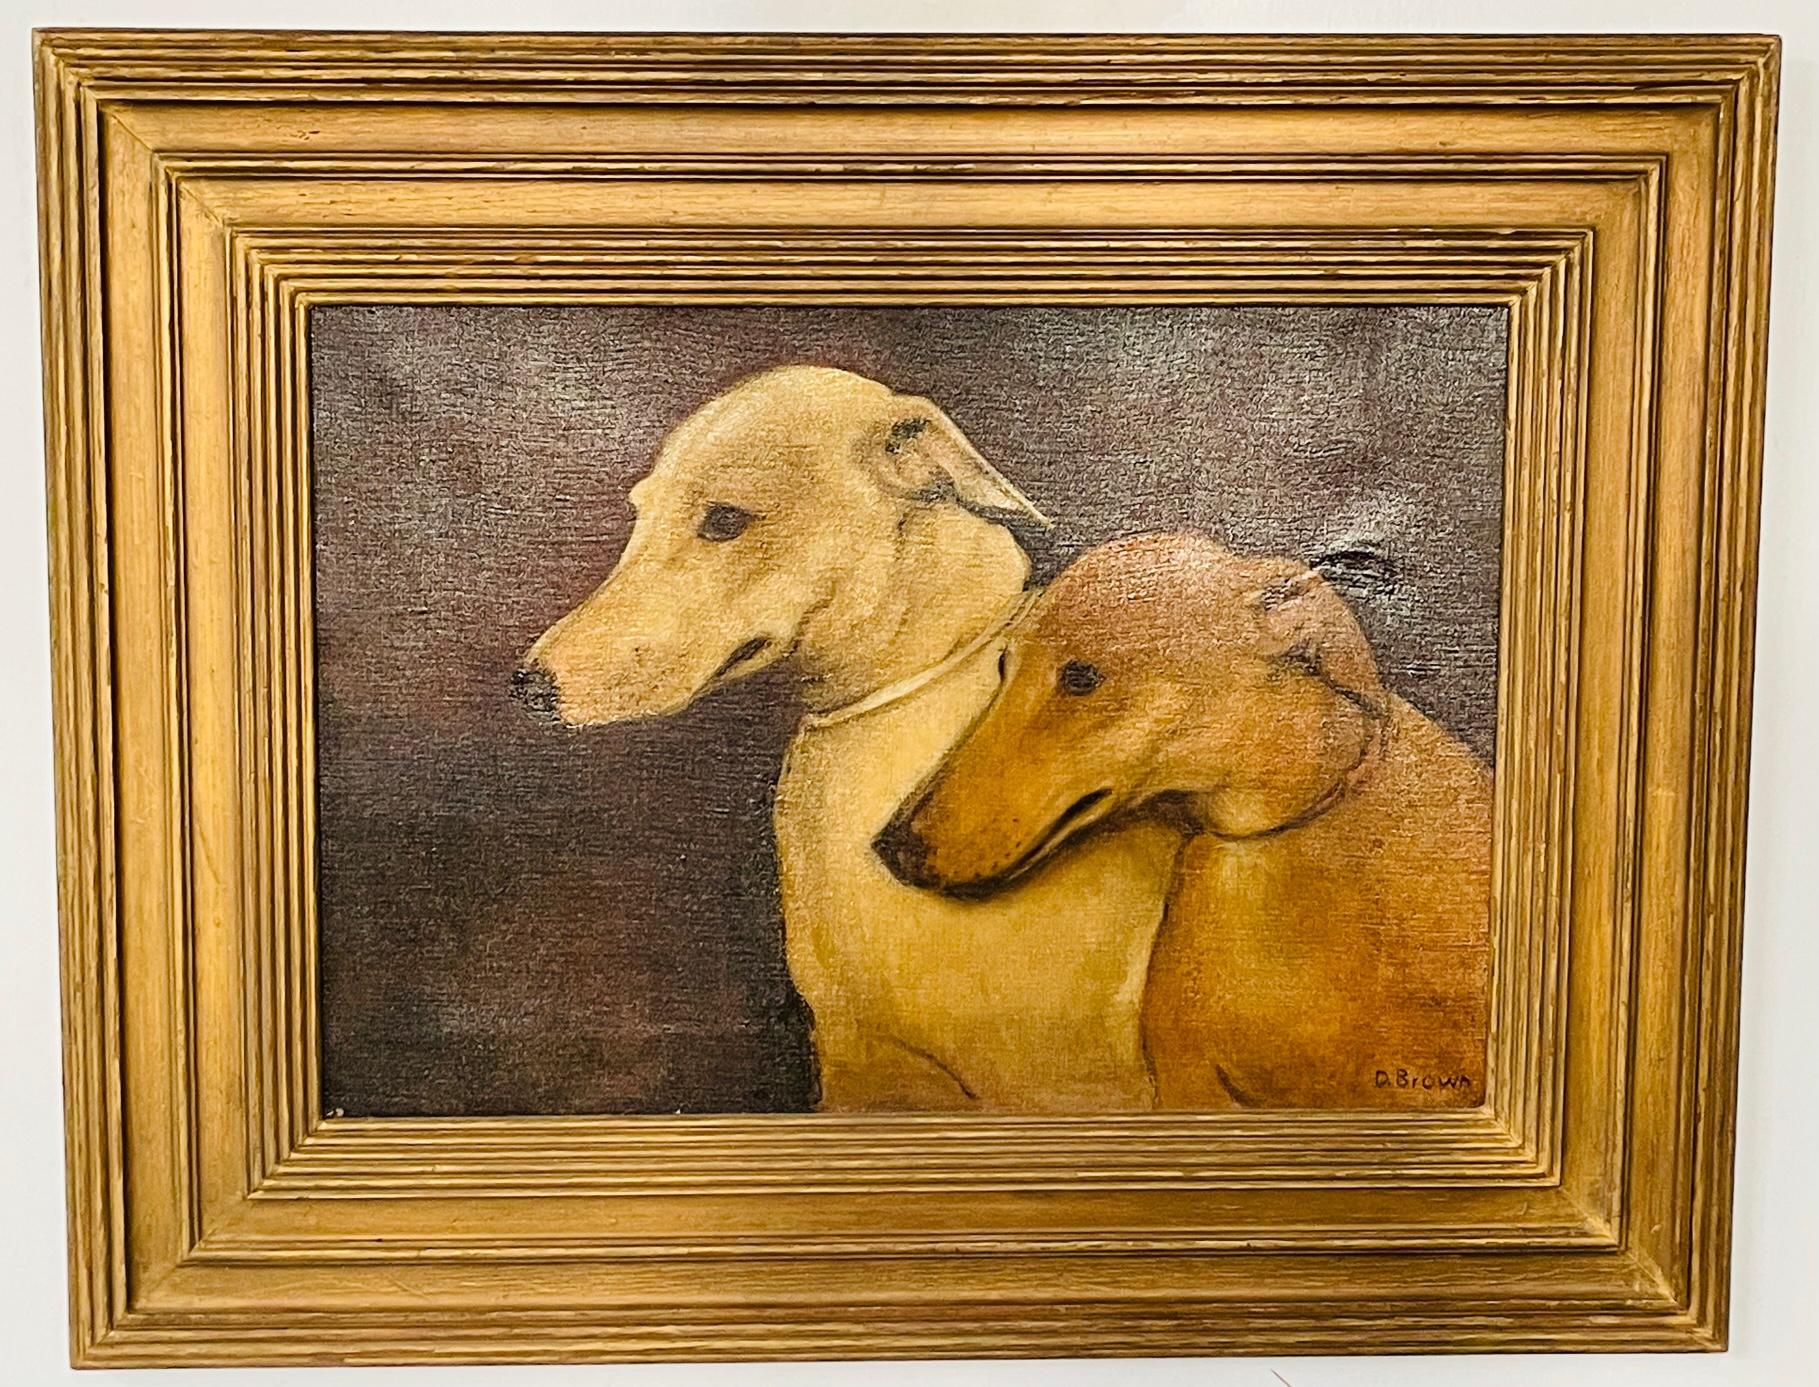 An 1970's oil on canvas featuring a portrait of two dog's side portrait , possibly Greyhounds, in neutral brown and beige colors. The painting is signed by artist D.Brown in the bottom and is finely presented in a custom wooden gilded frame.